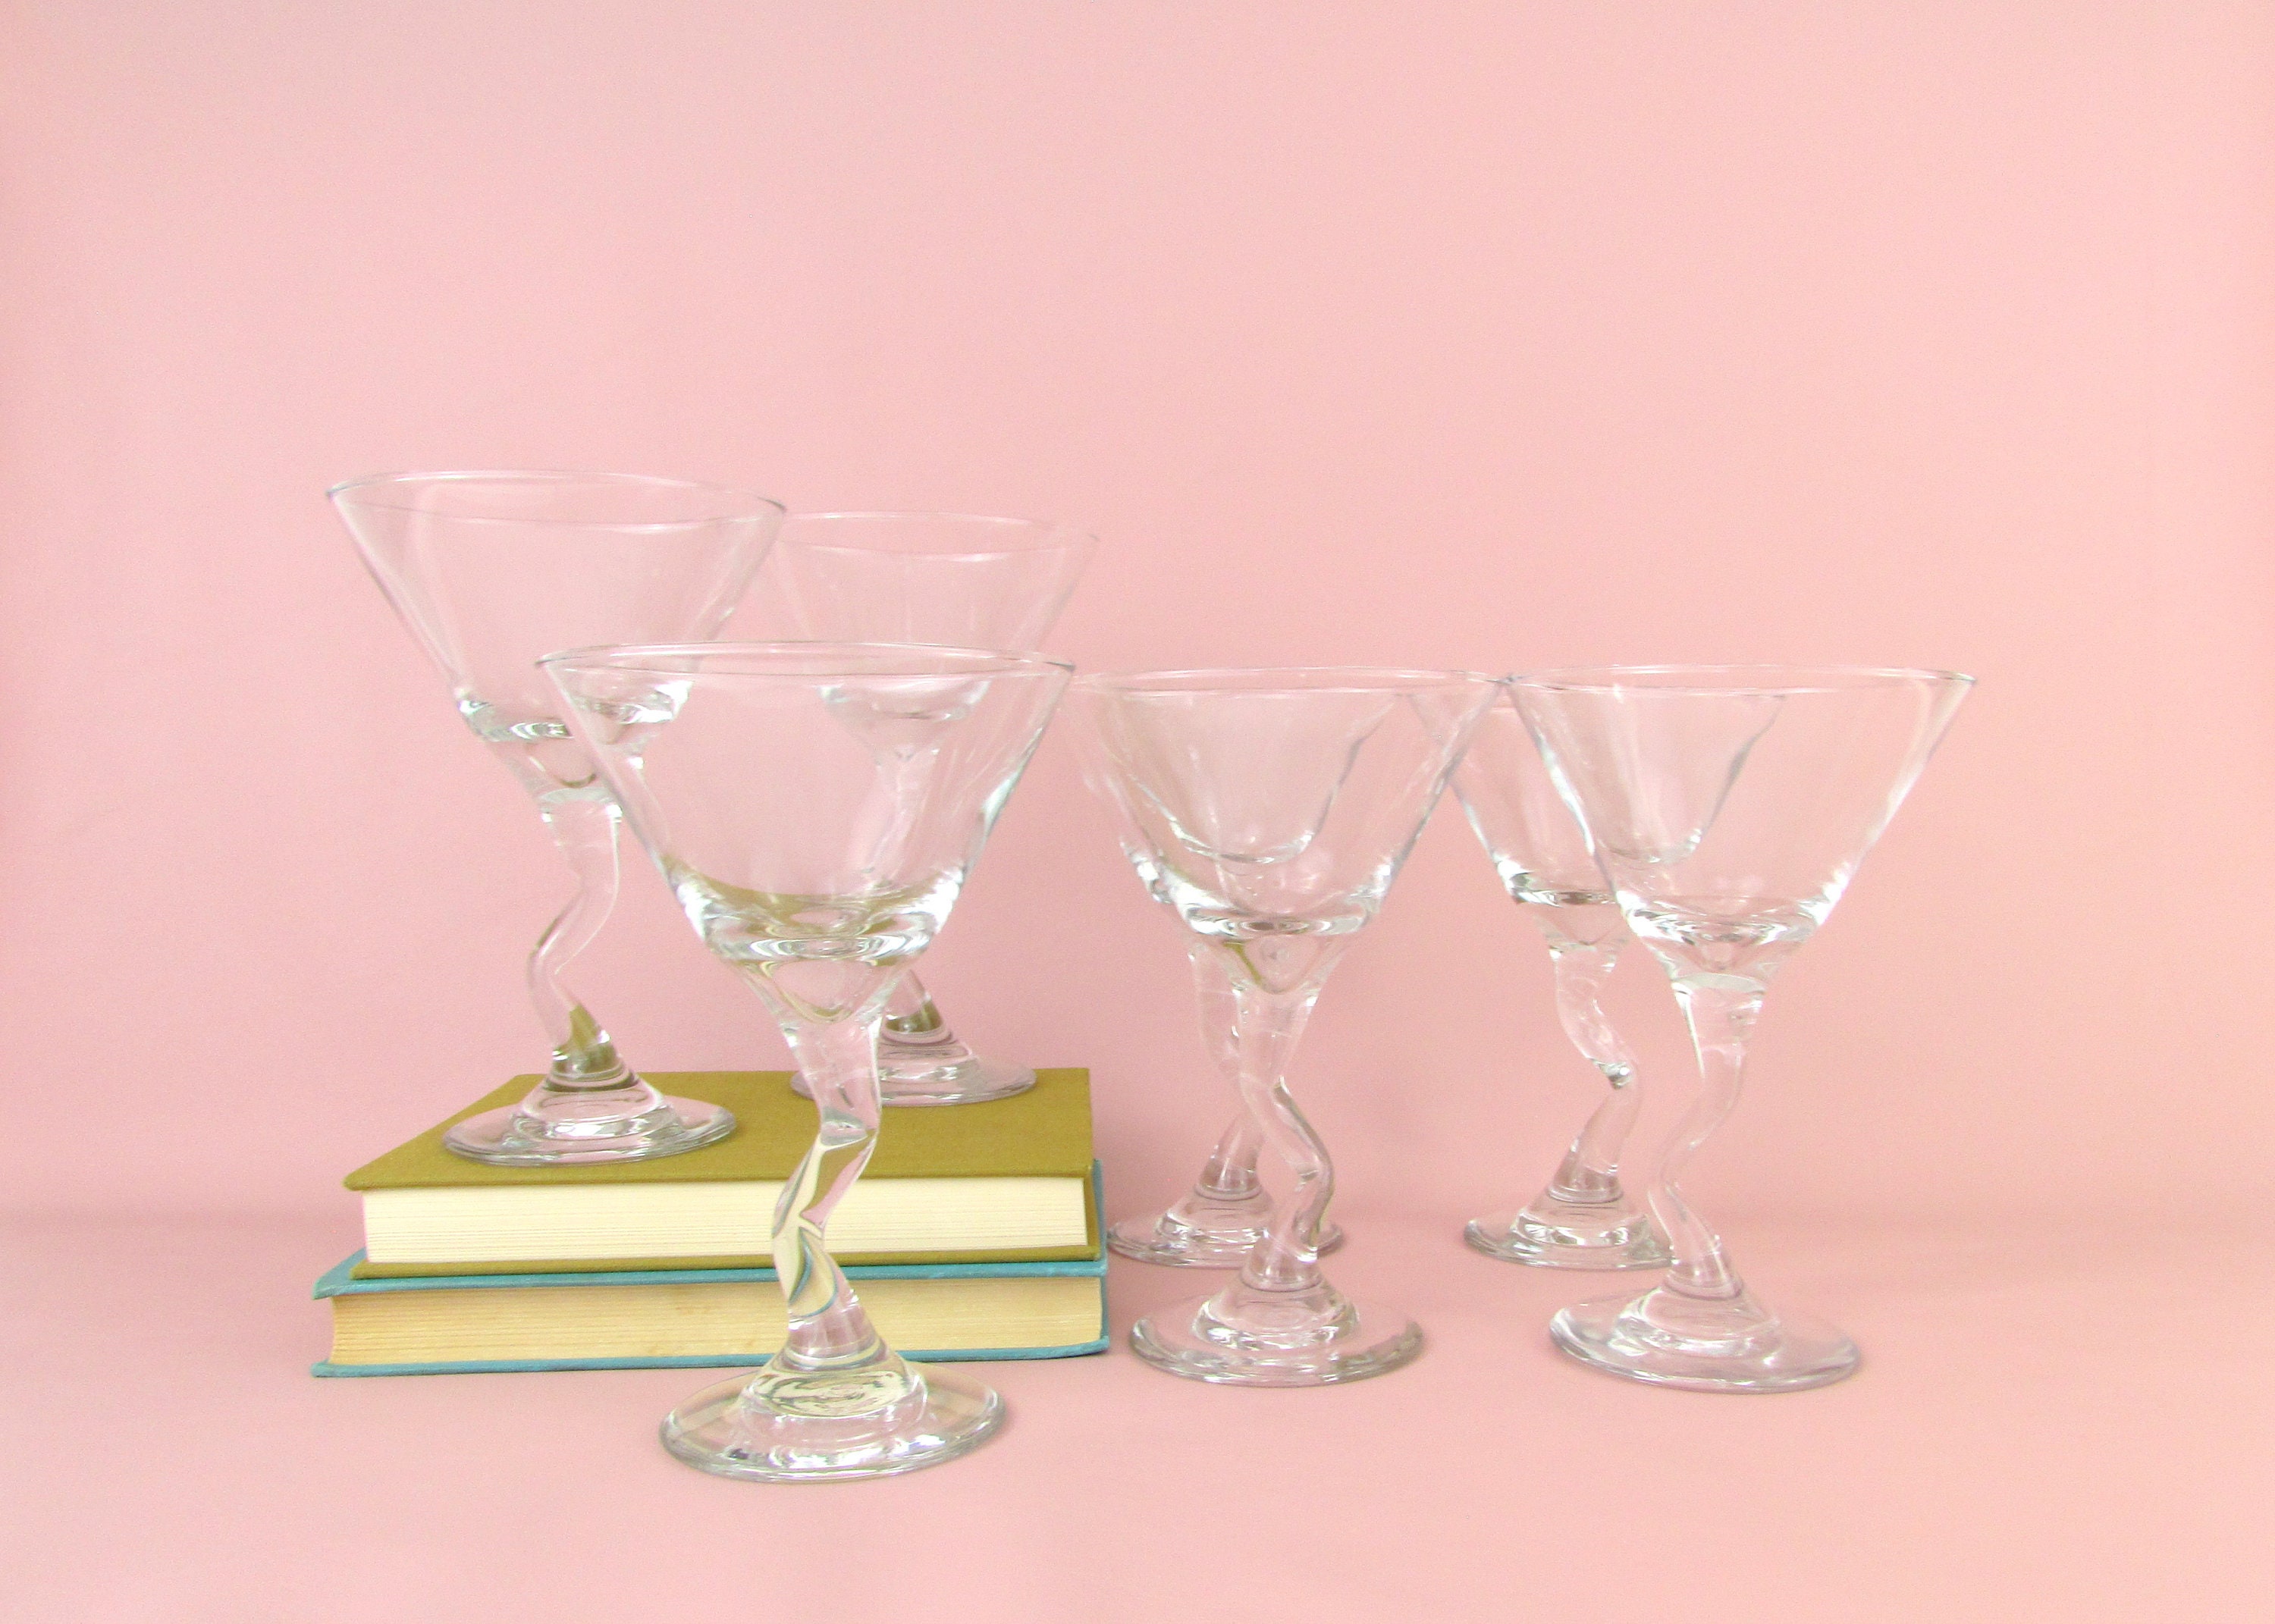 DELICATE CRYSTAL GLASS SHORT CUT STEM MARTINI COSMO COCKTAIL GLASSES SET OF  3 on eBid United States